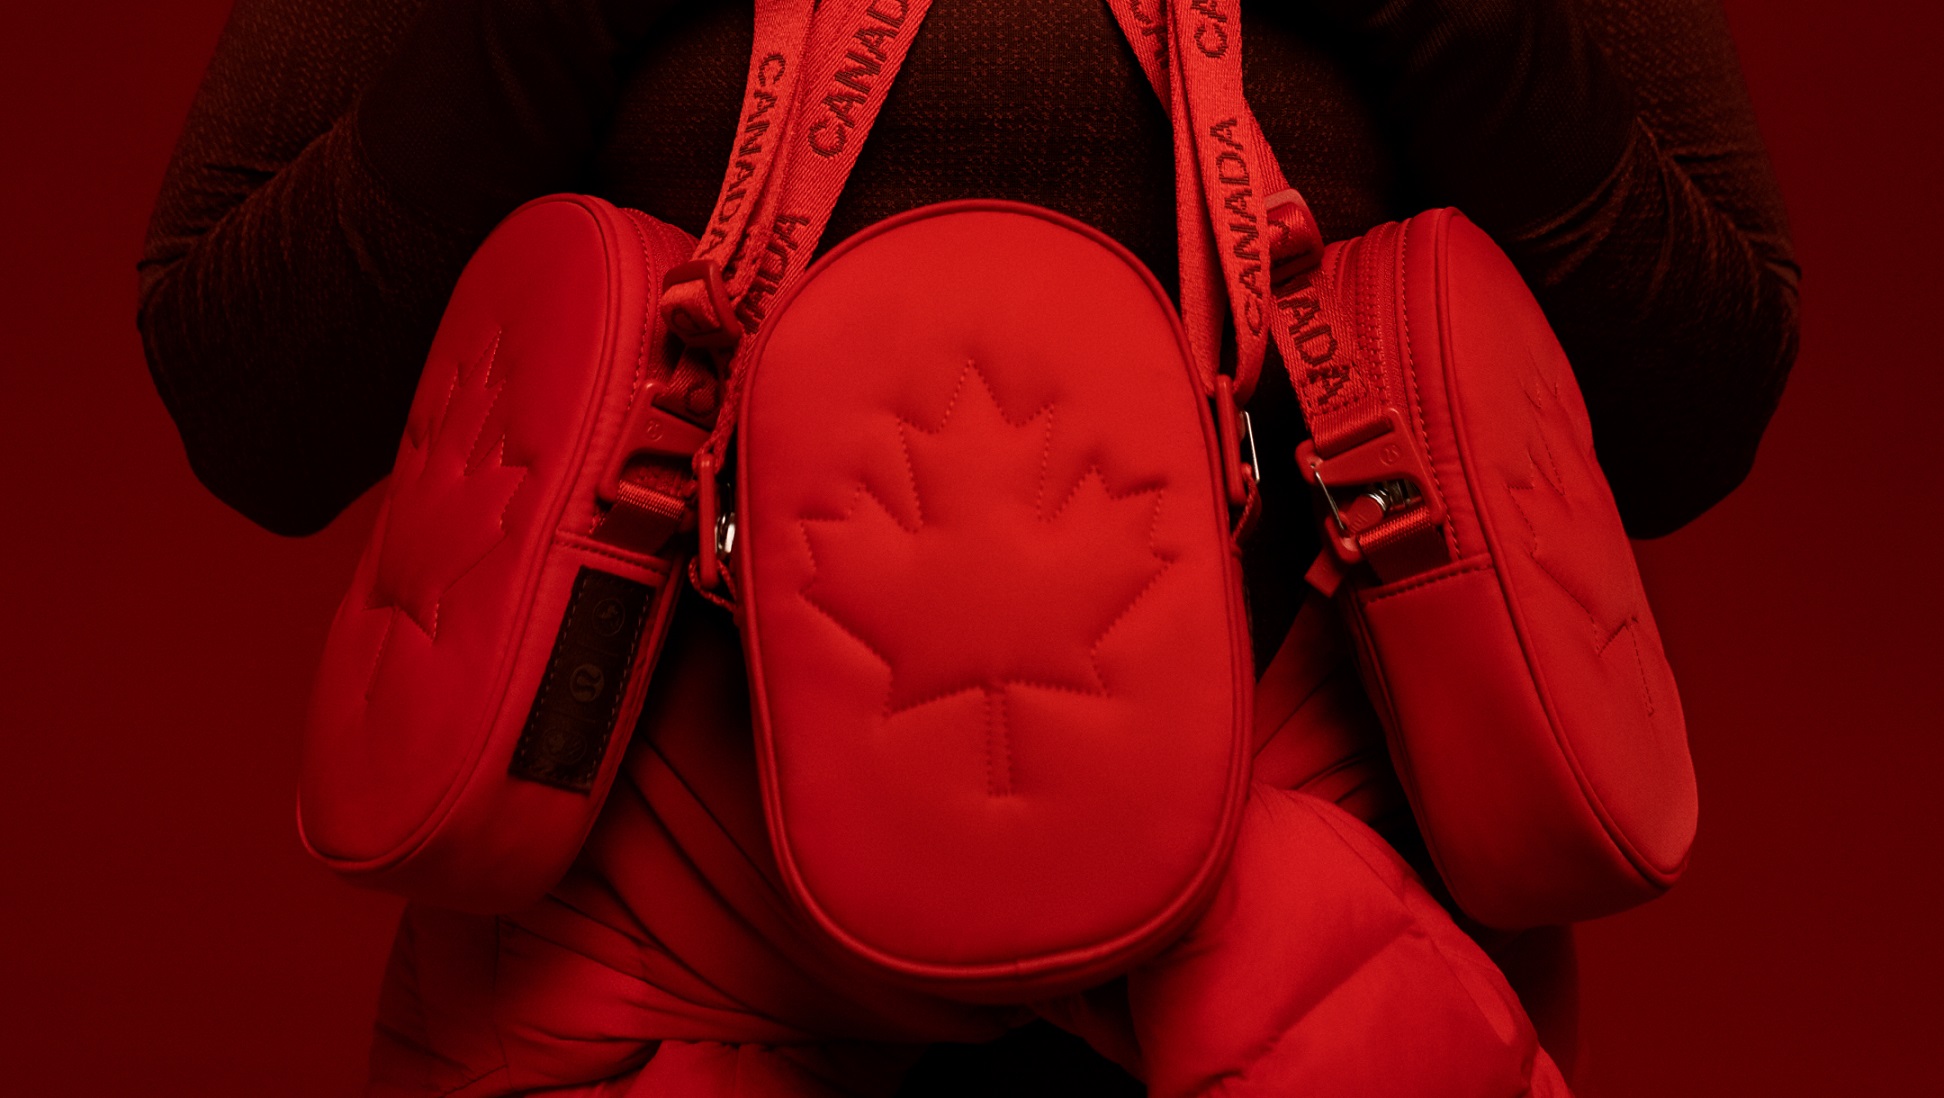 A image showing three red lululemon Team Canada Future Legacy bags